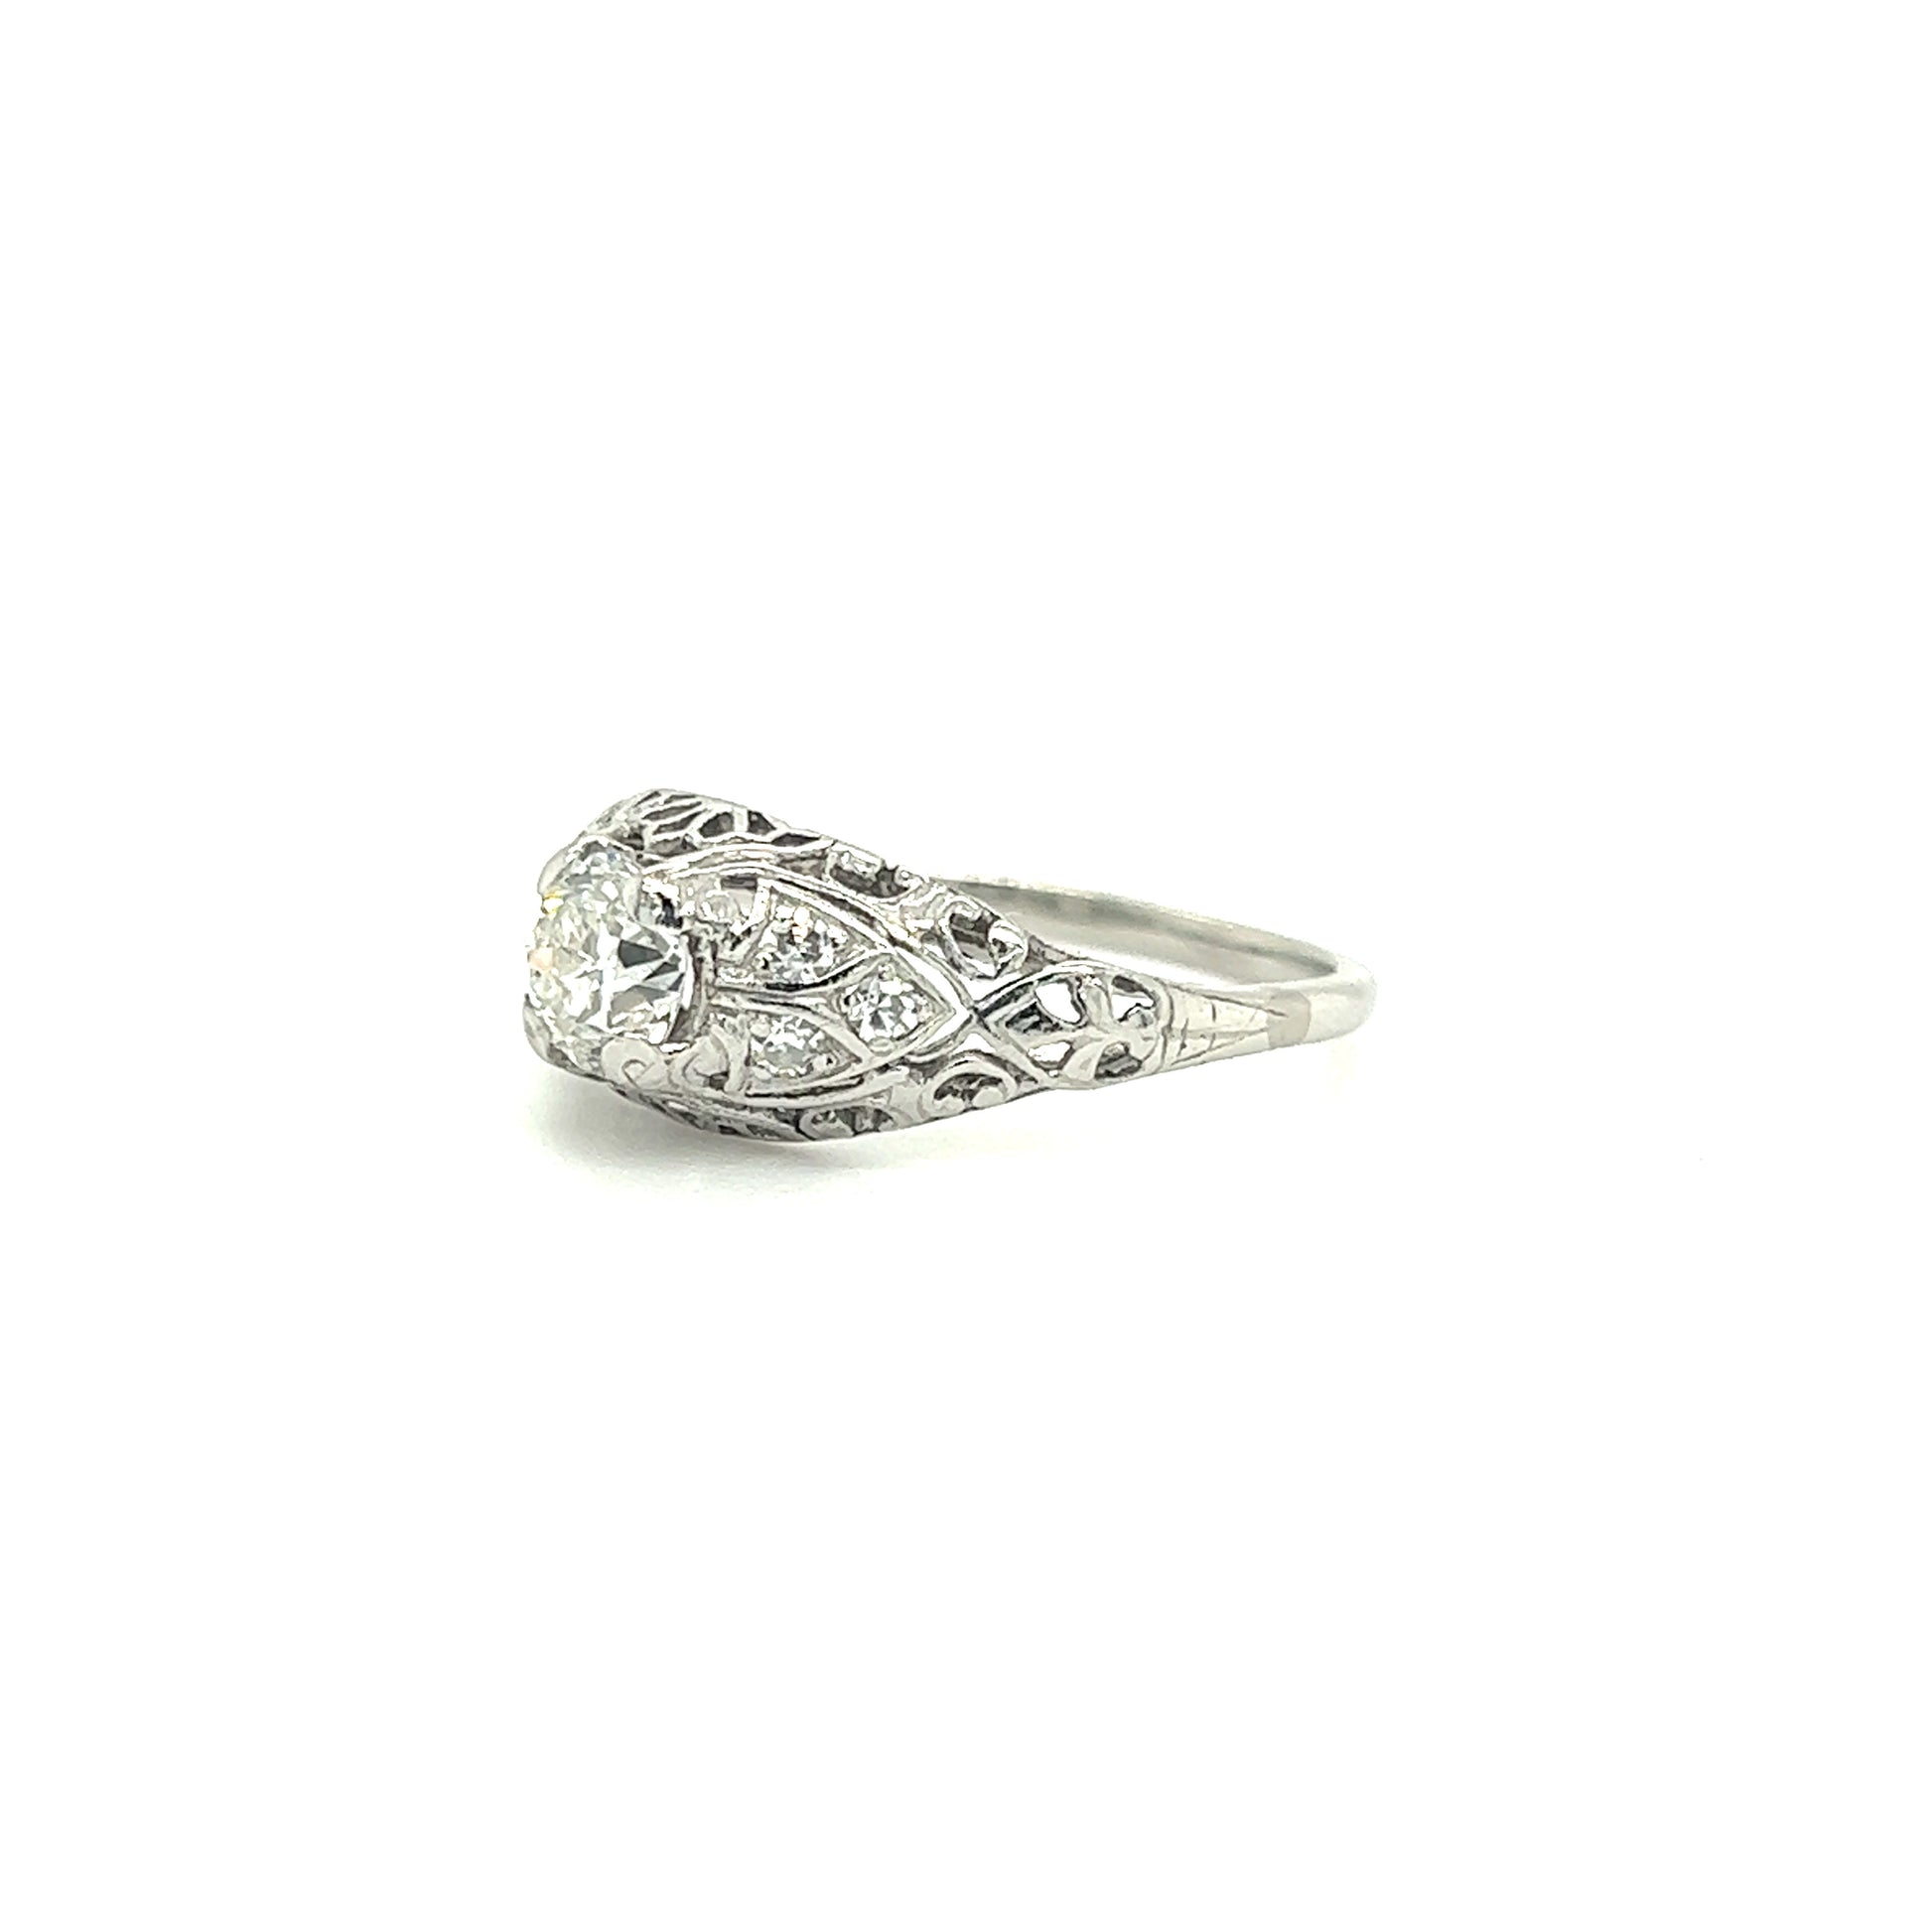 Old European-Cut Diamond Ring with Six Side Diamonds in Platinum Right Side View